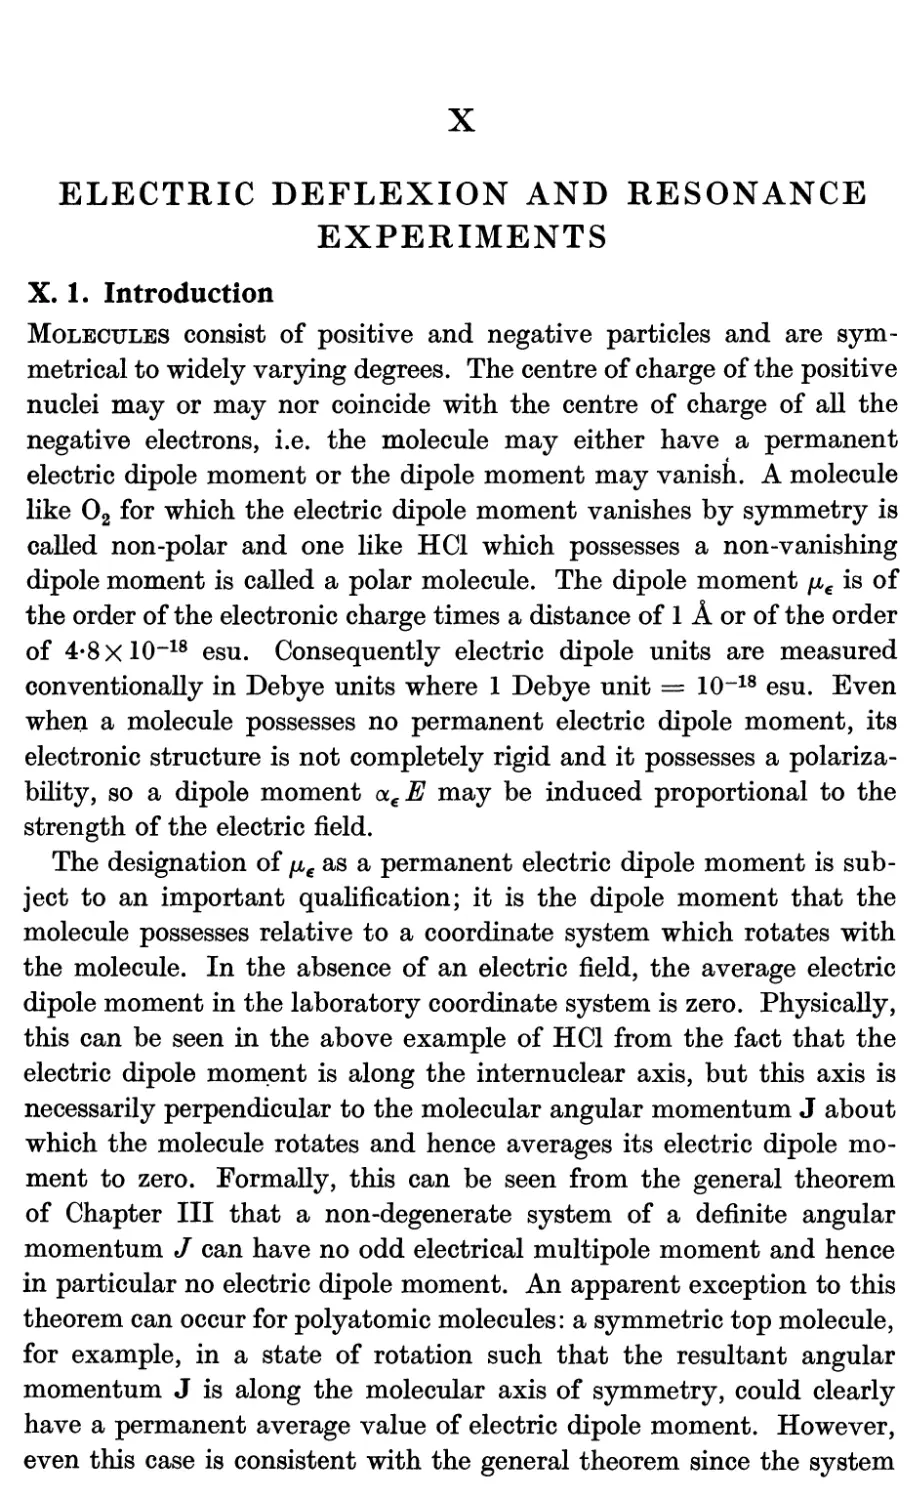 X. ELECTRIC DEFLEXION AND RESONANCE EXPERIMENTS